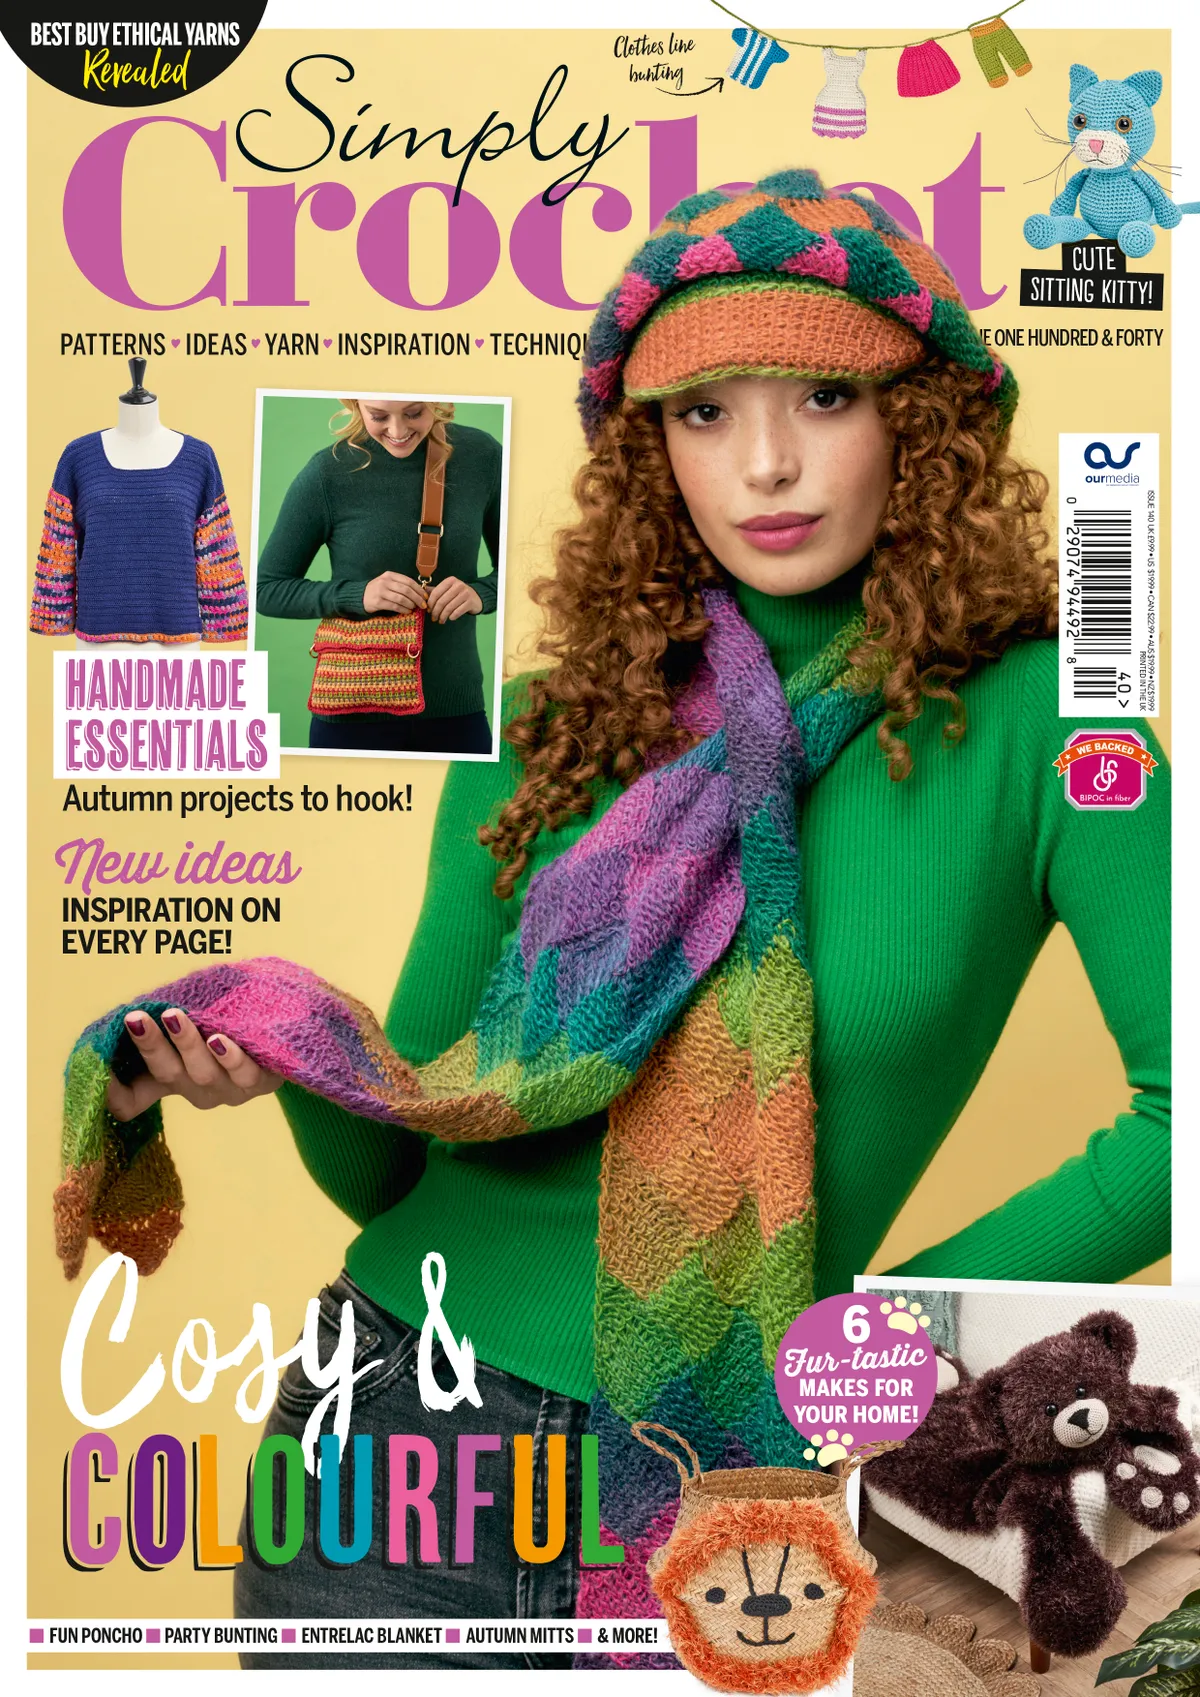 Simply Crochet issue 140